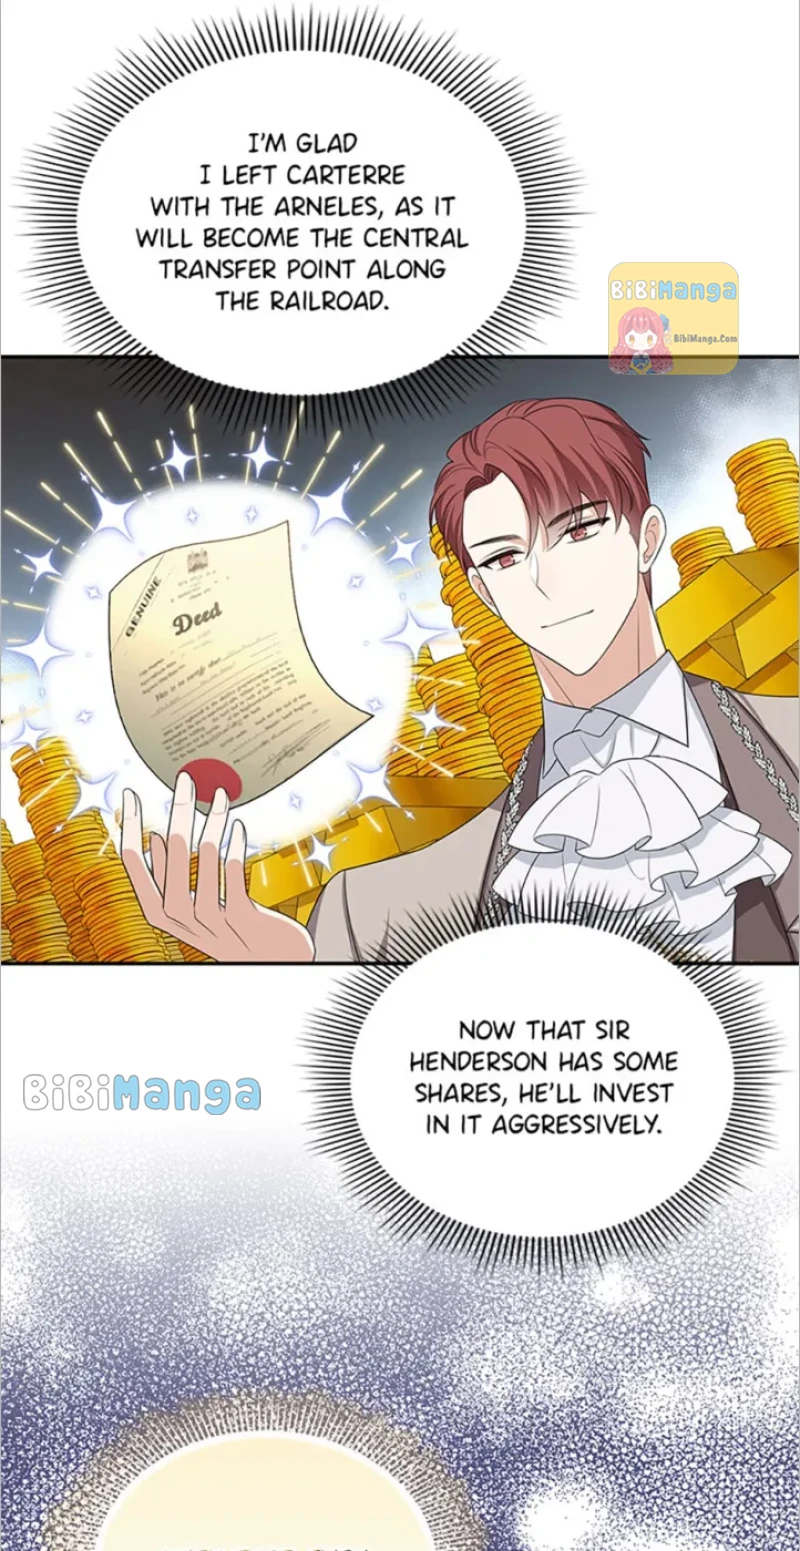 I bought the land, not the man chapter 47